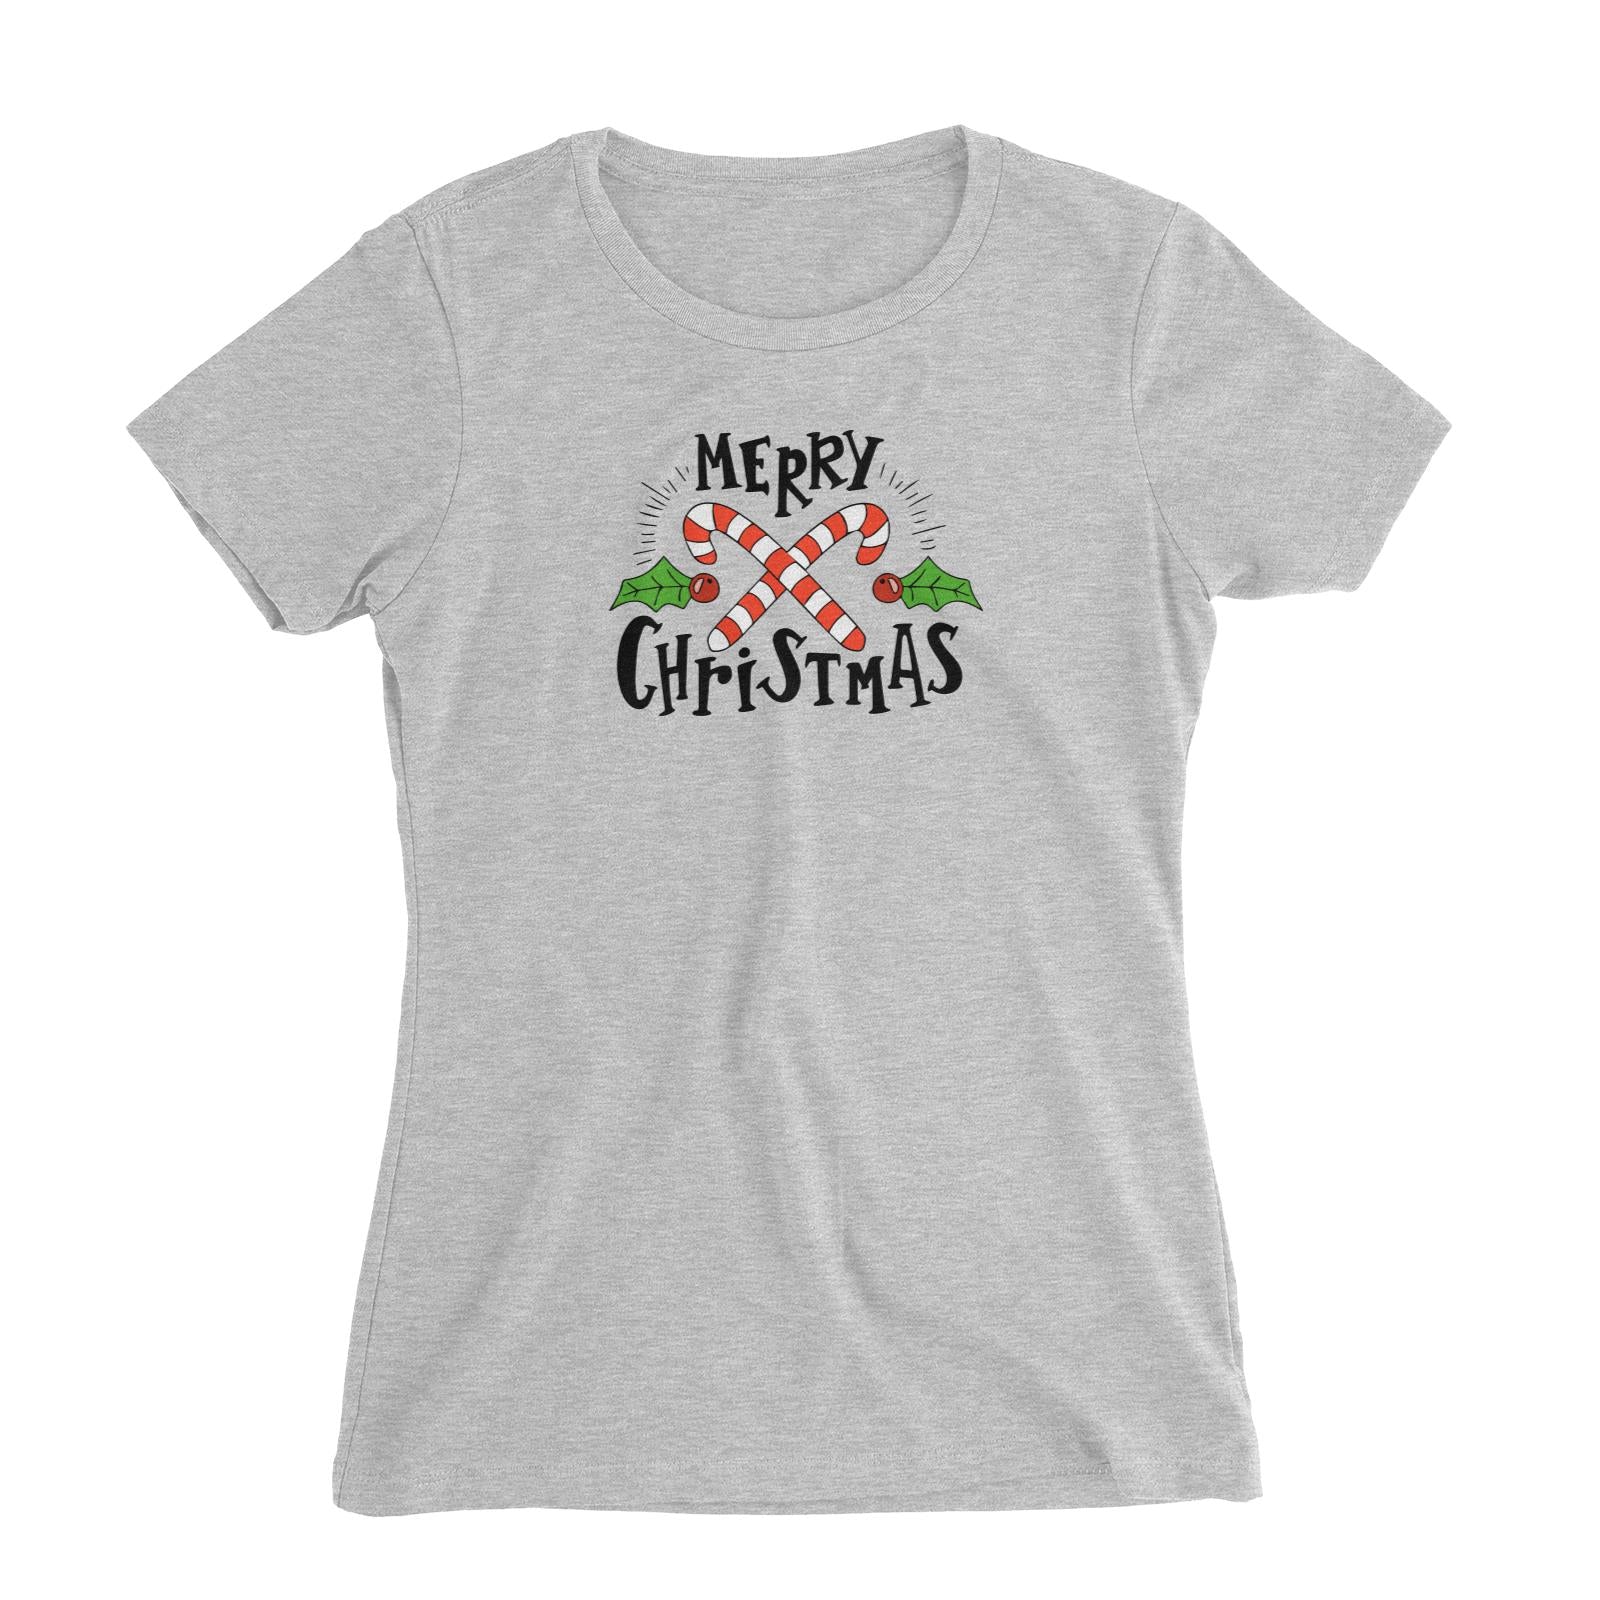 Merry Chrismas with Holly and Candy Cane Greeting Women's Slim Fit T-Shirt Christmas Matching Family Lettering